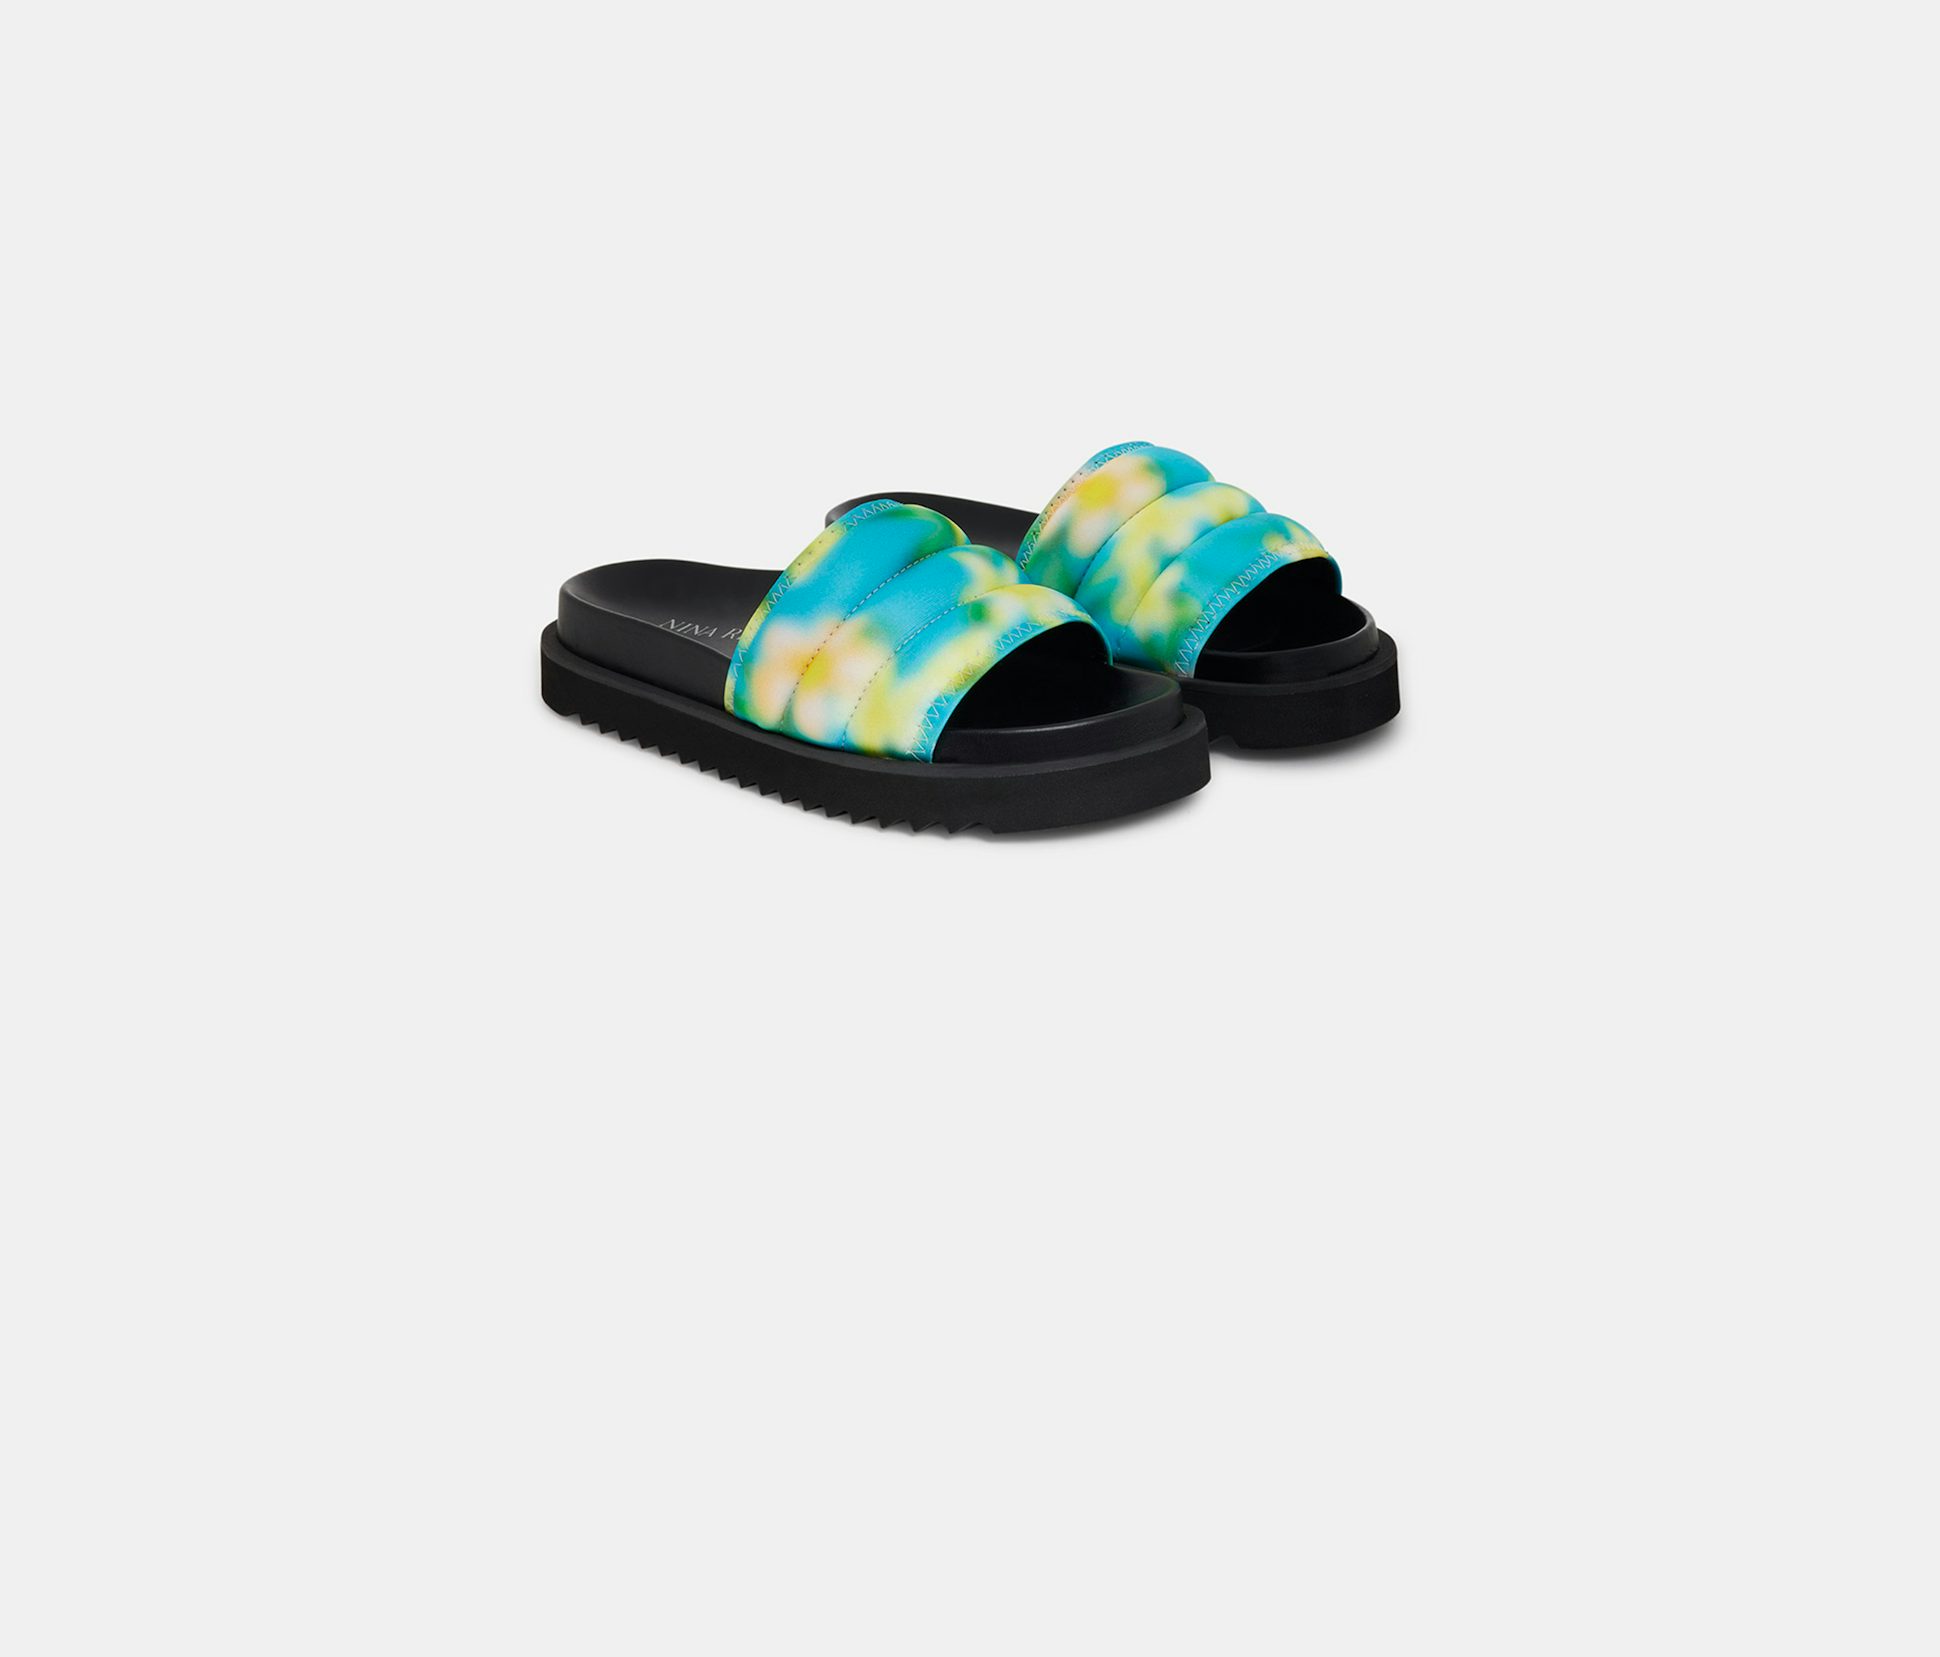 Quilted Water Green Gradient Printed Neoprene Slides with Leather Sole - Nina Ricci